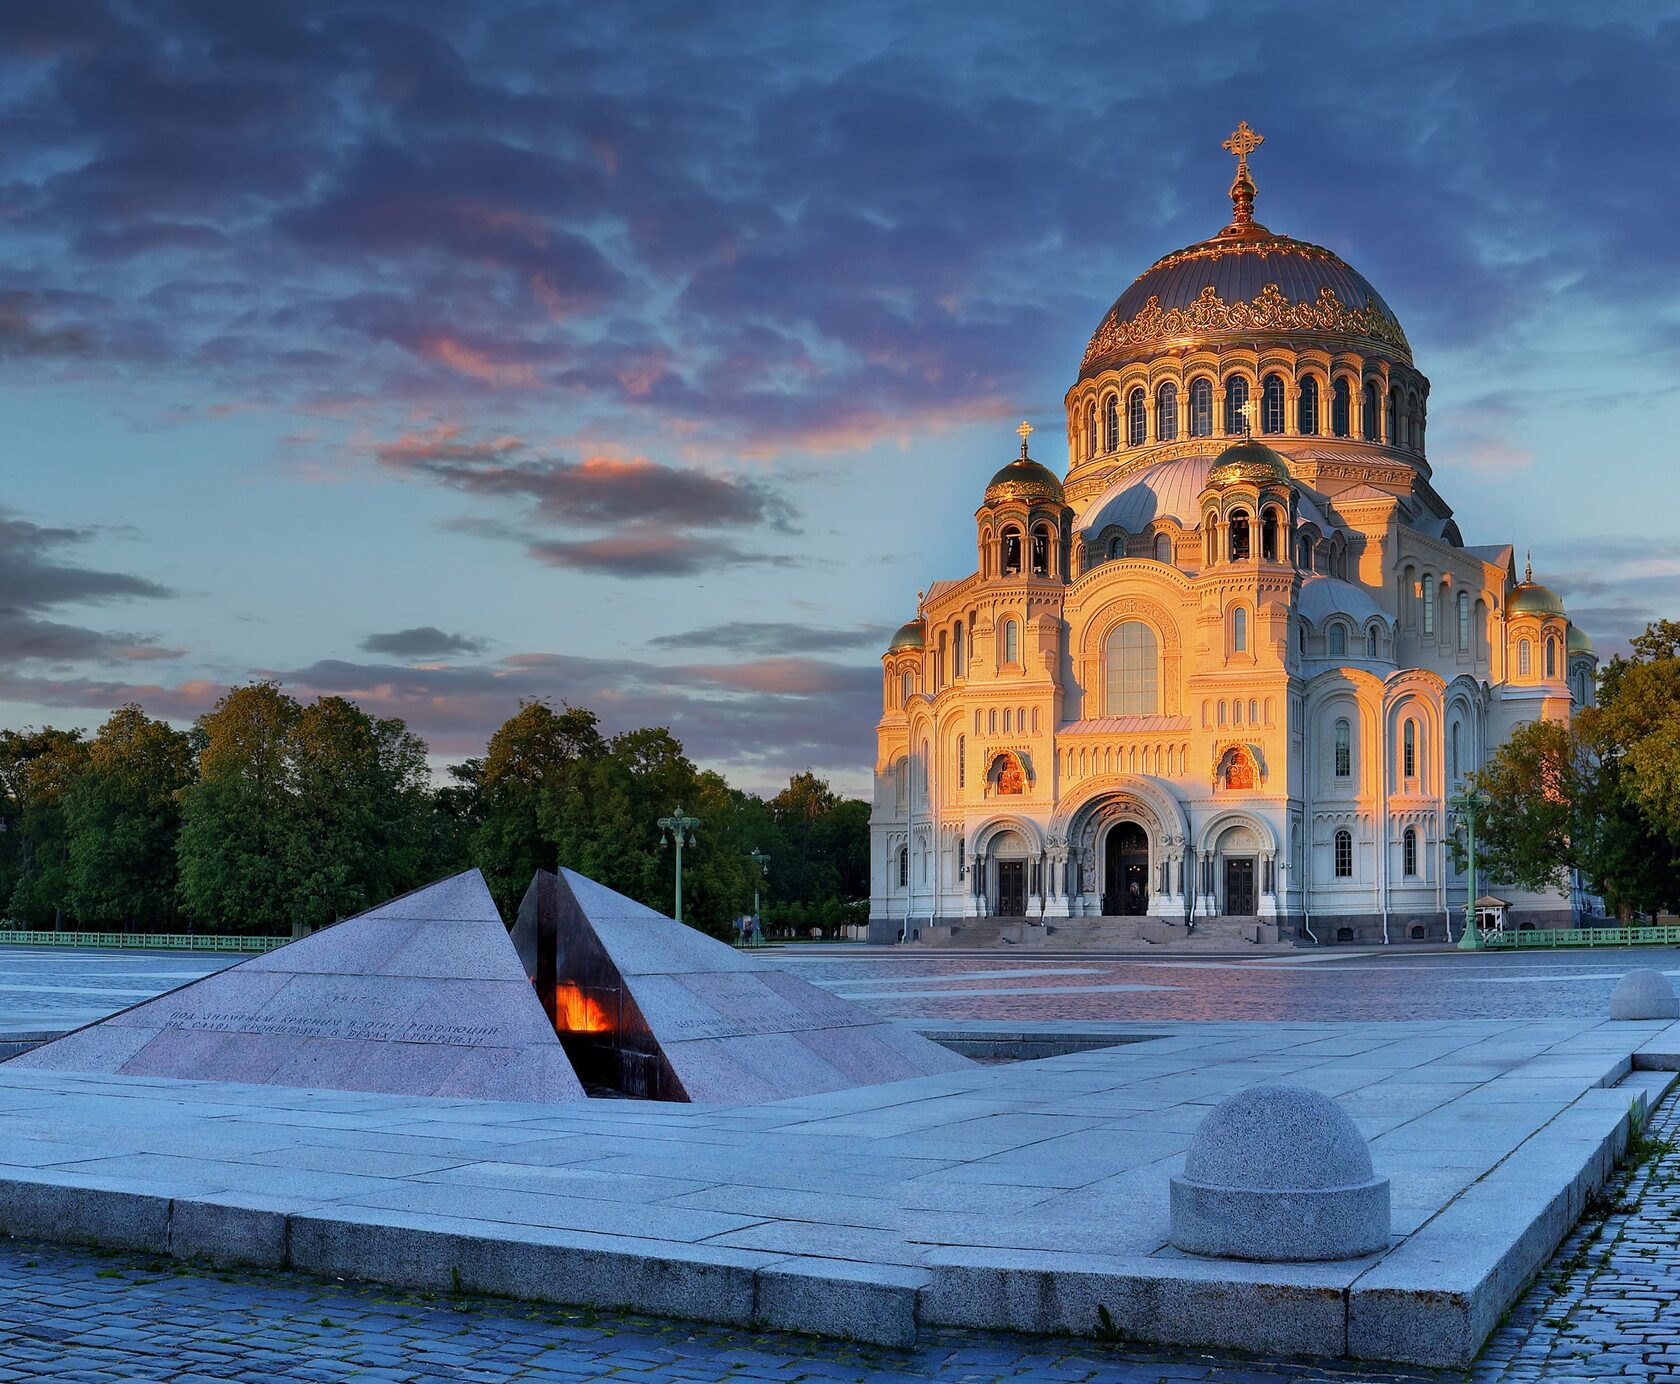 The Naval cathedral of Saint Nicholas in Kronstadt is a Russian Orthodox cathedral